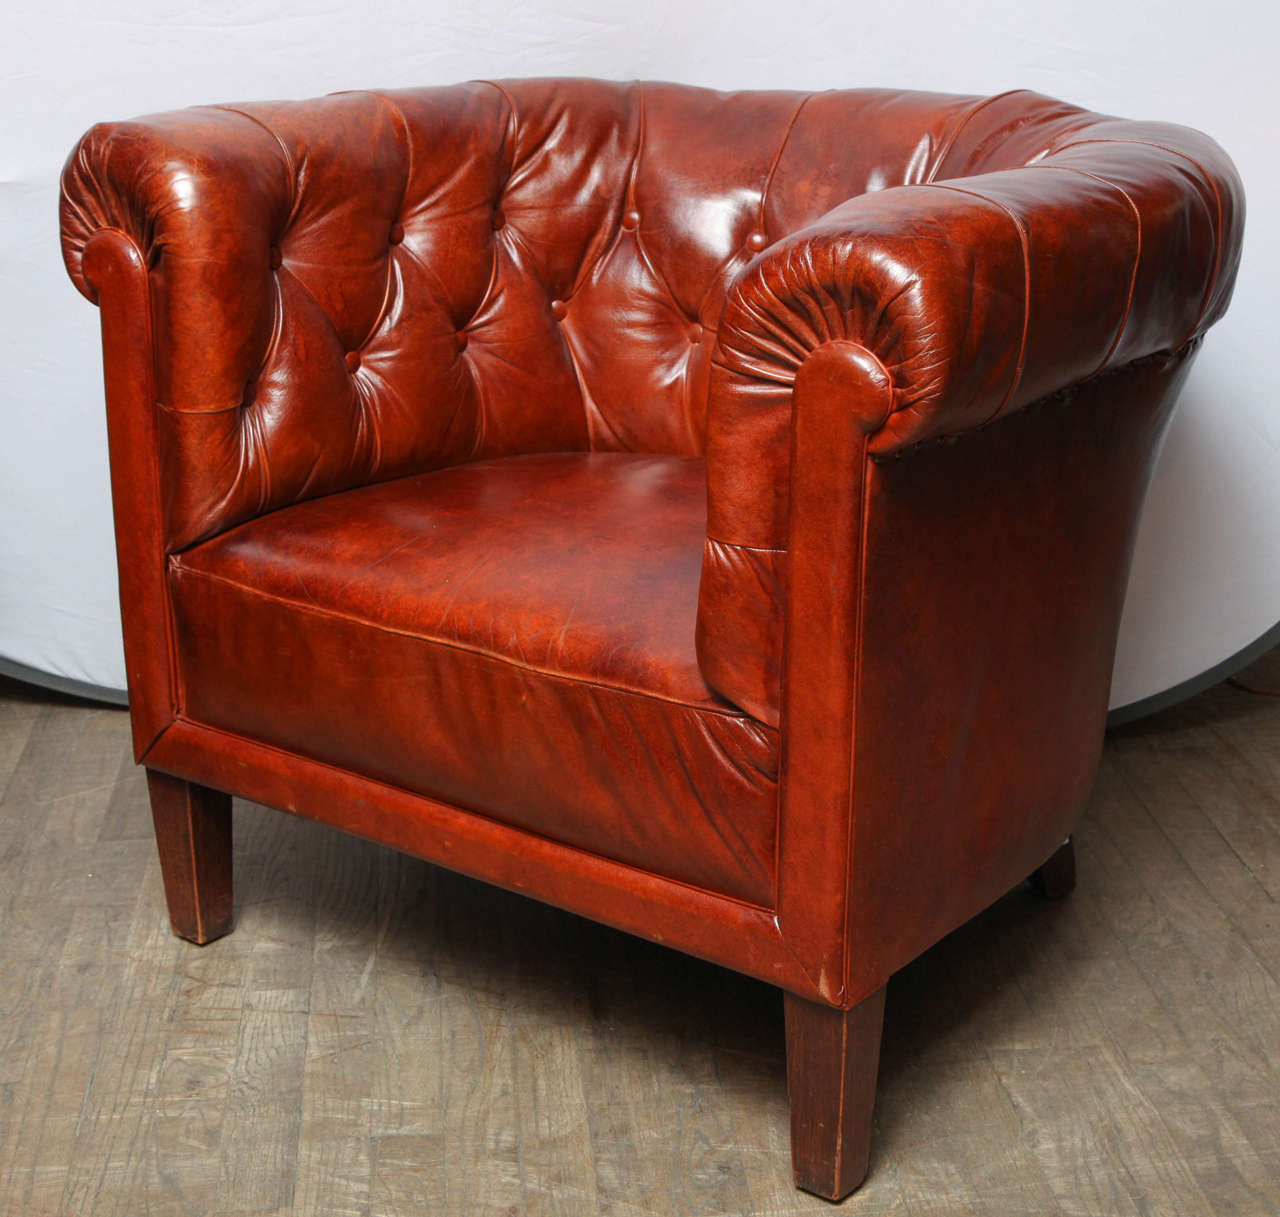 UK circa 1910

A pair of exquisite leather chairs handpicked by the buyers at Ann-Morris, Inc.